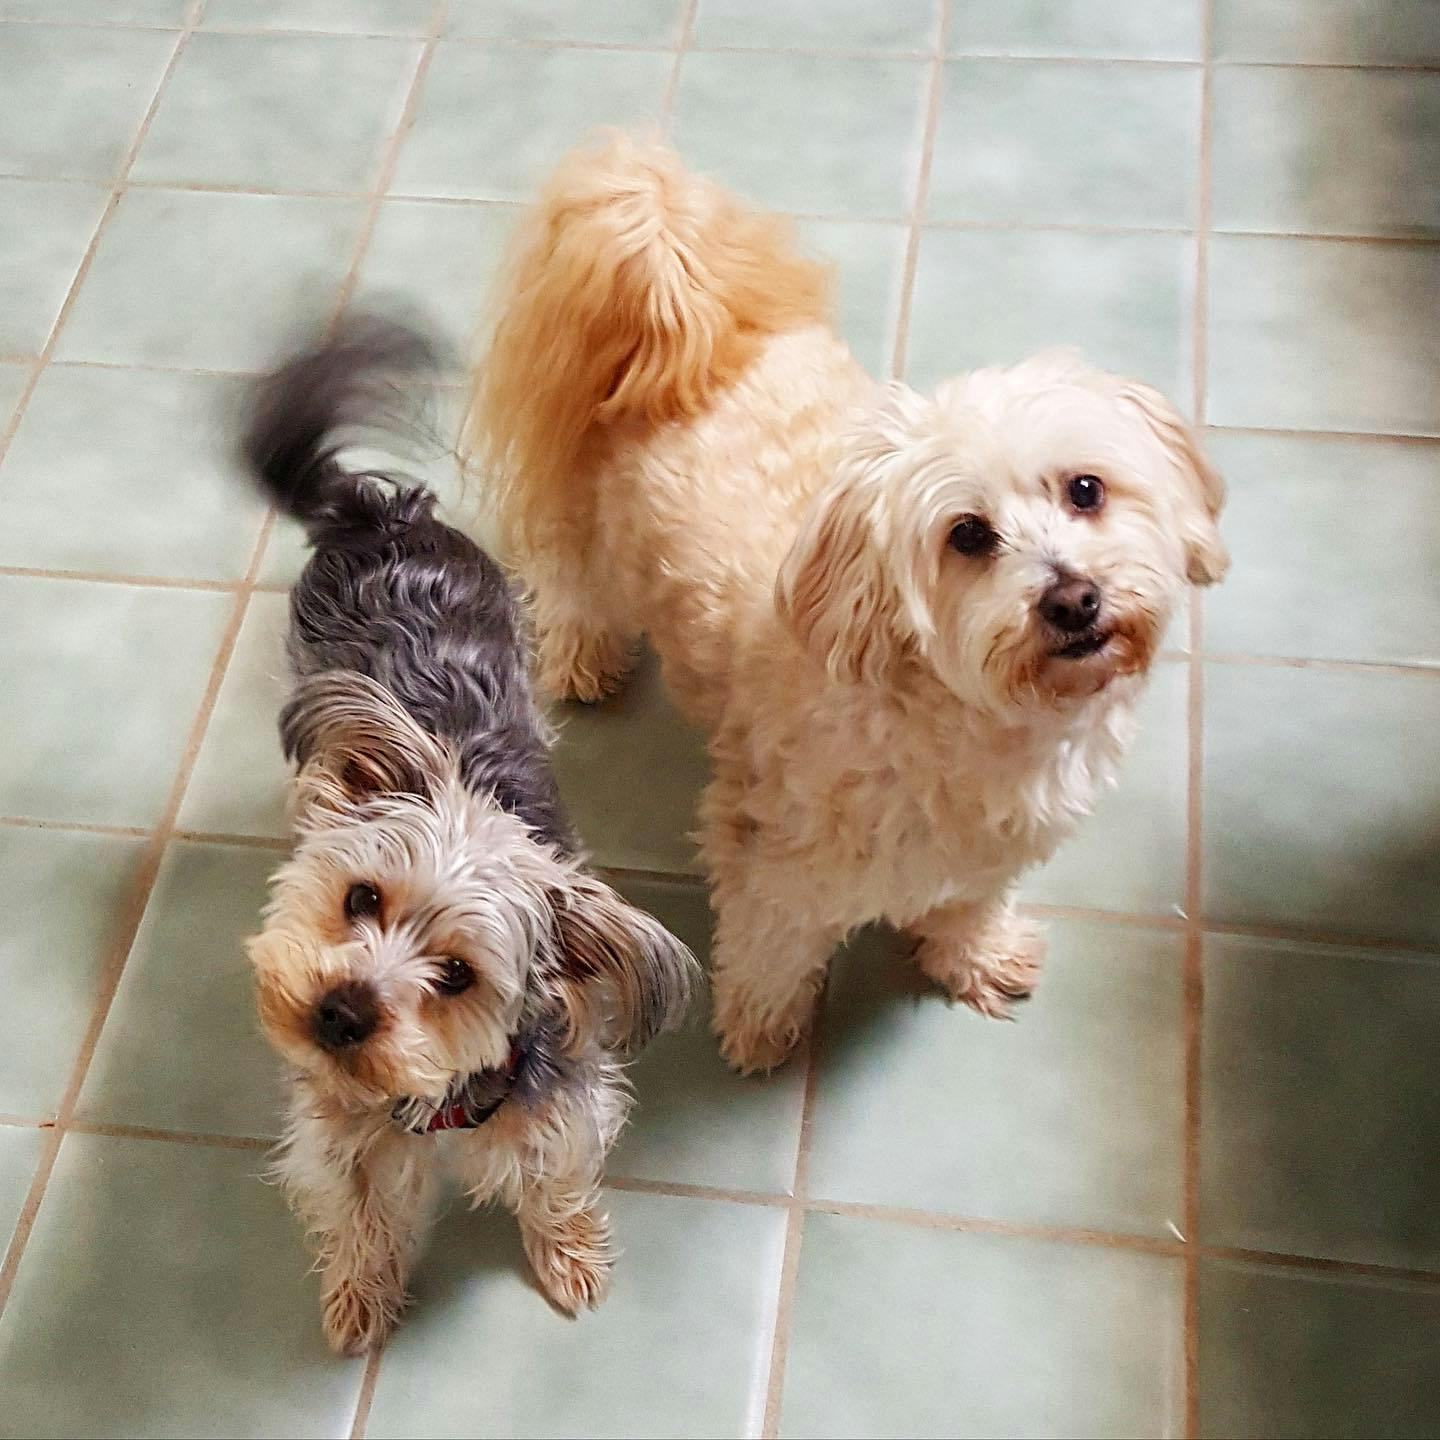 Neo and Jack after Mom says the magic word 😄

My little fartsmuckers 😅

Do your fur babies speak “people” too? 😂

#furbabychats
#yorkiemix 
#maltipoopal